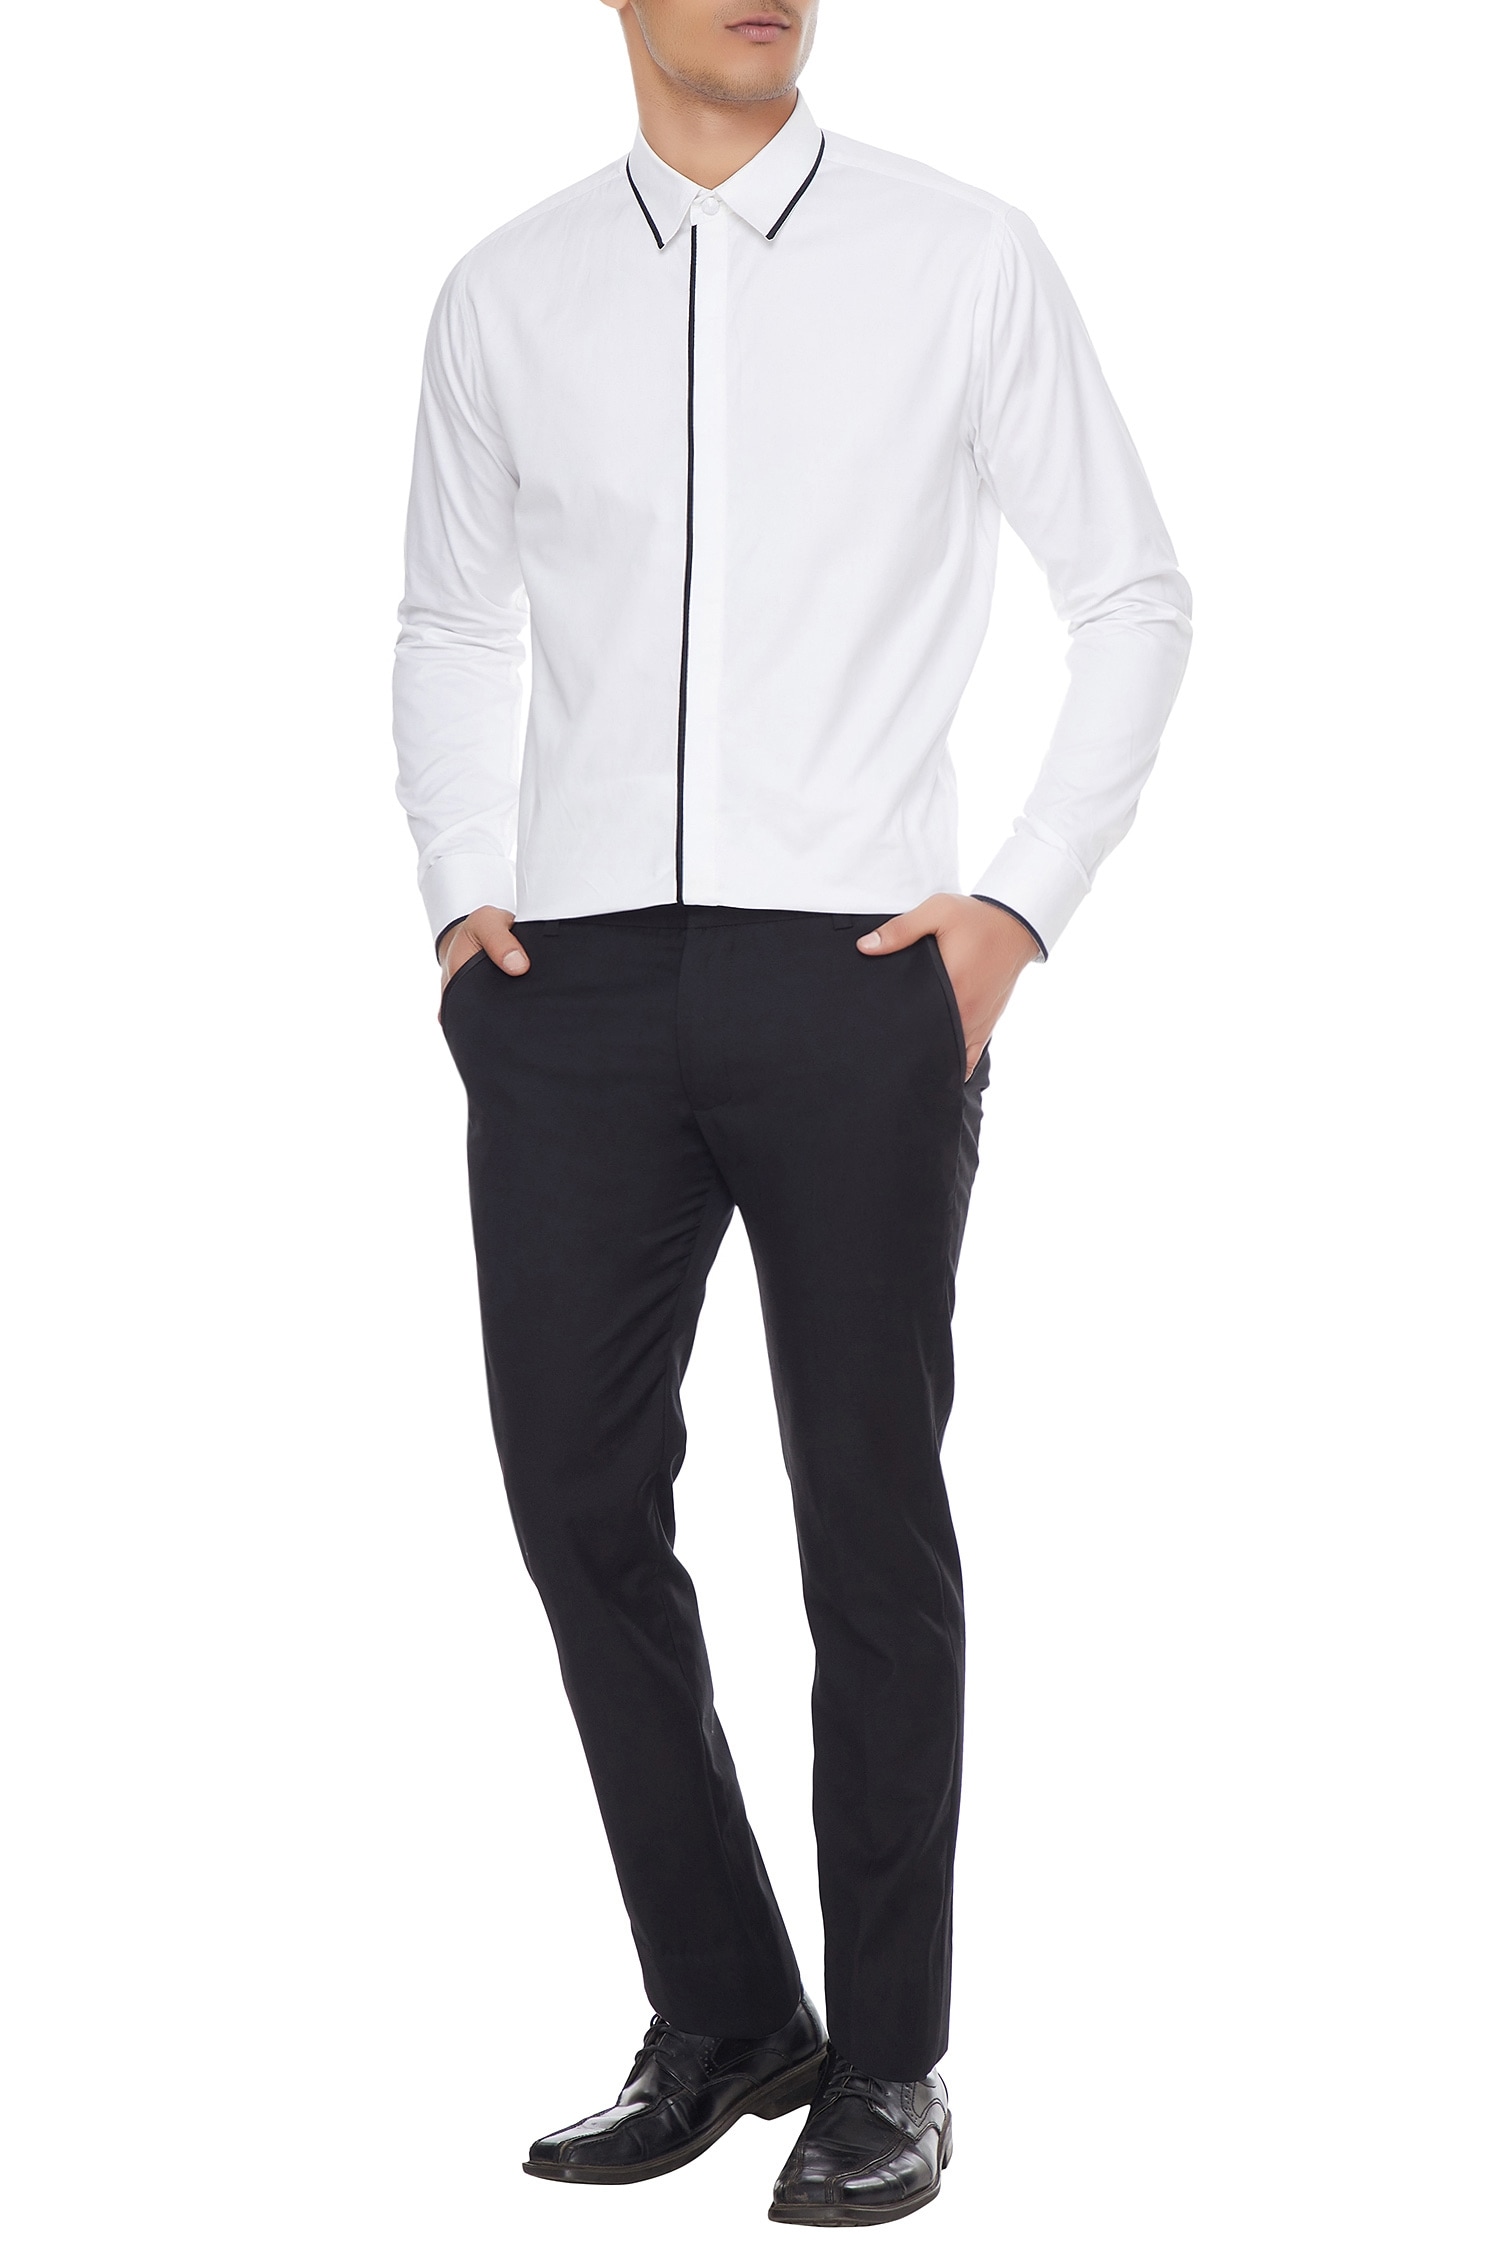 Formal Shirt With Black Pant Shop Clothing Shoes Online